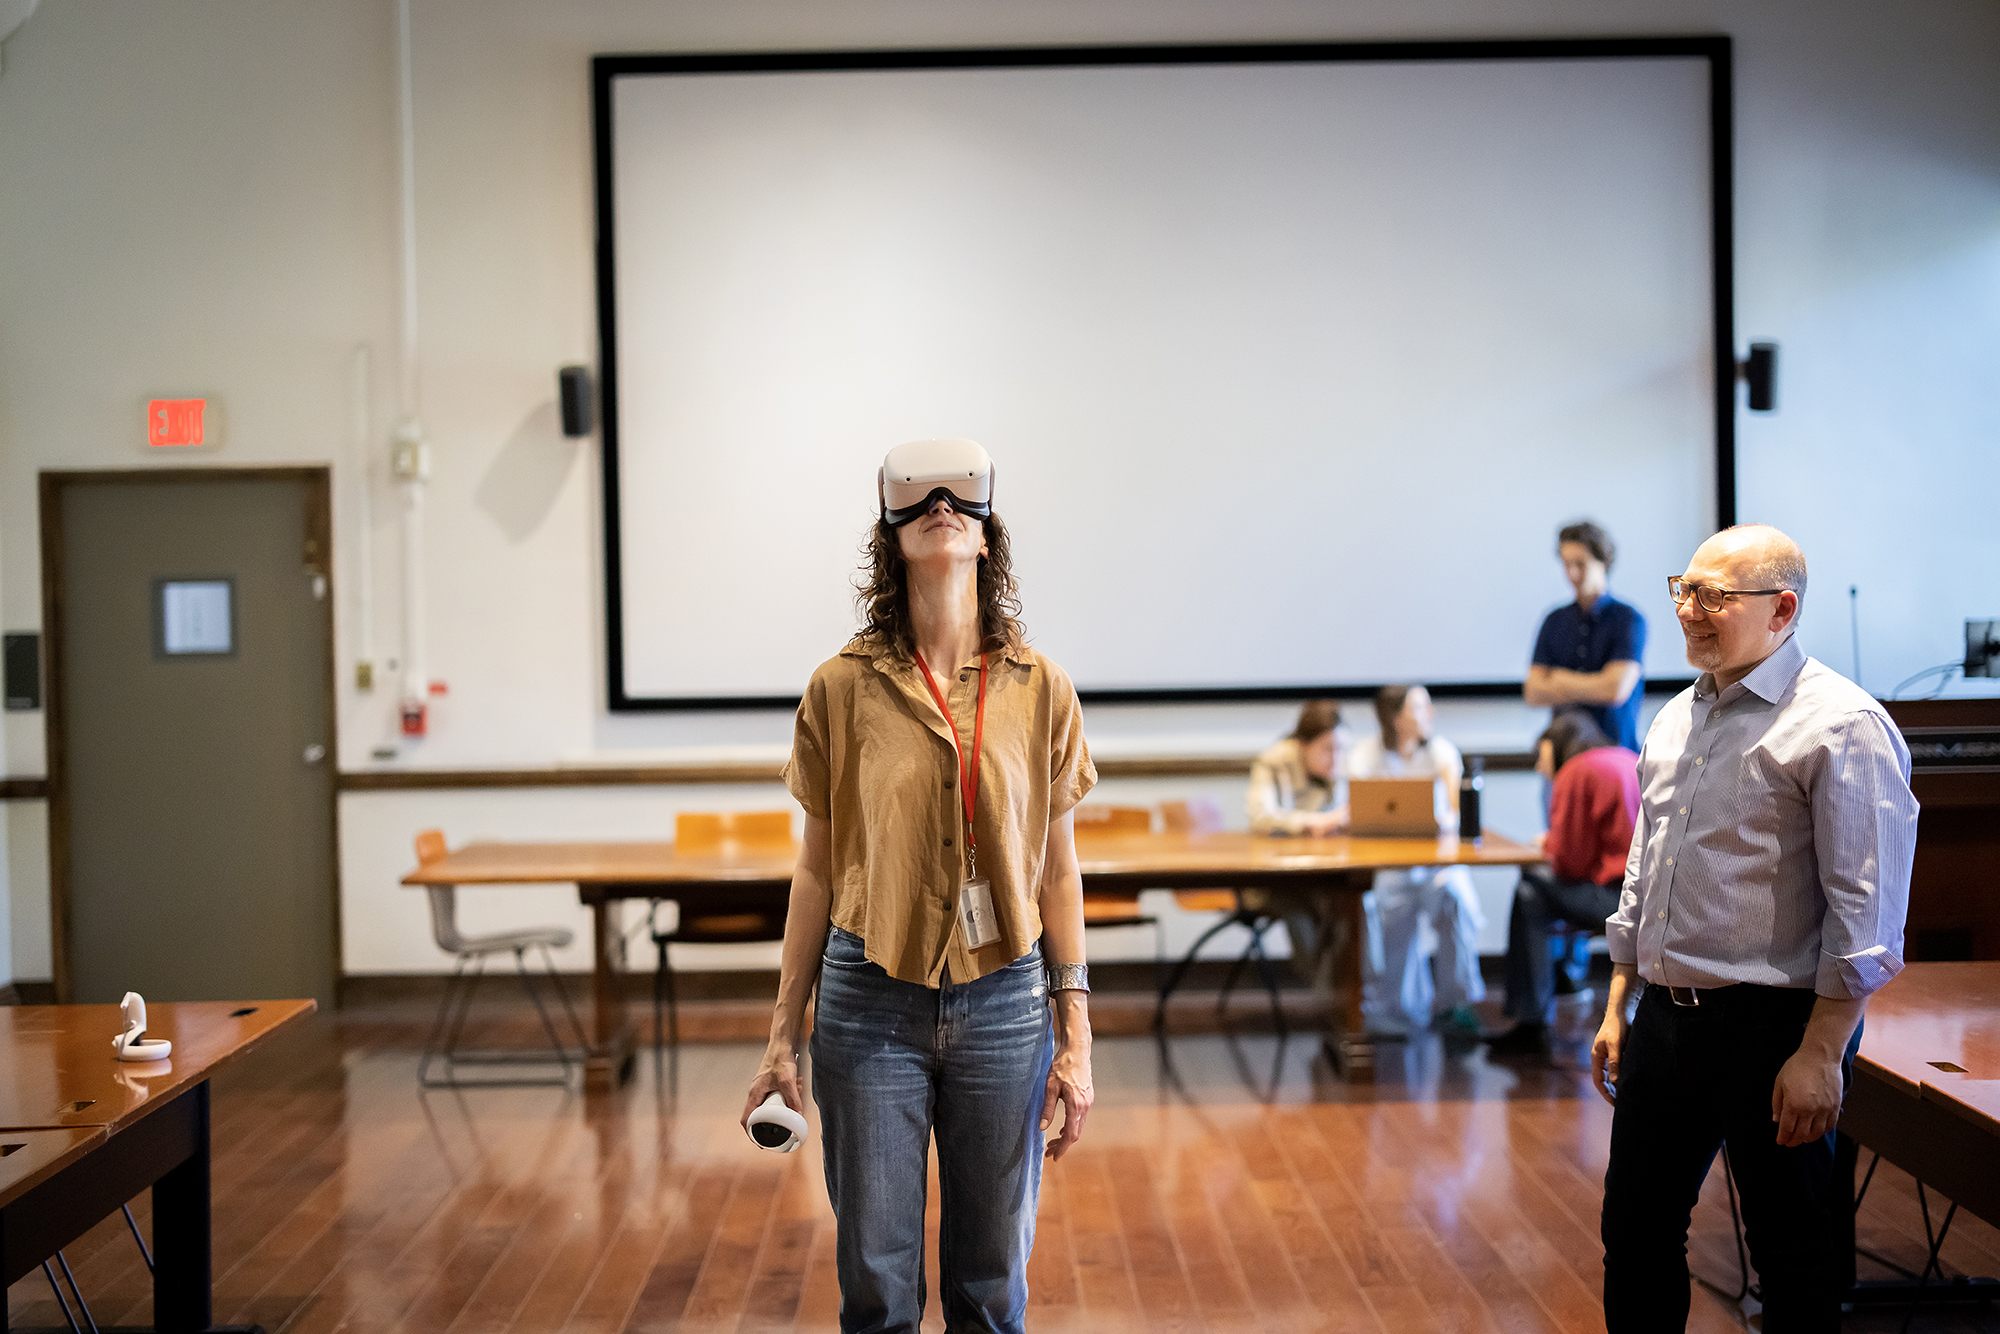 A student wearing VR goggles in a classroom with Peter Ducherney.